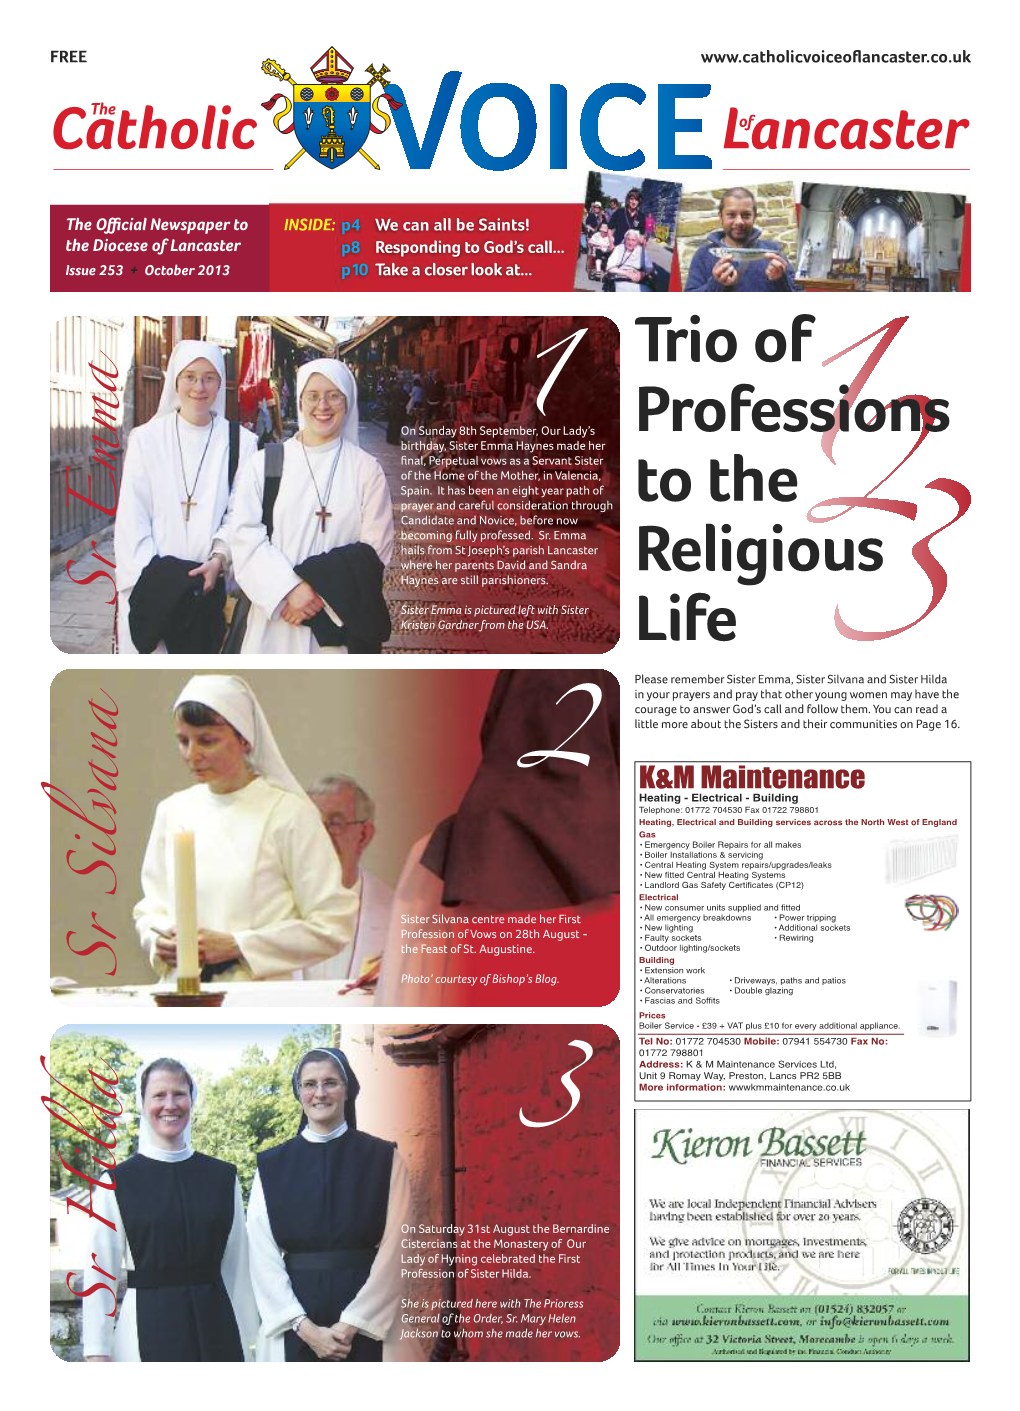 Trio of Professions to the Religious Life